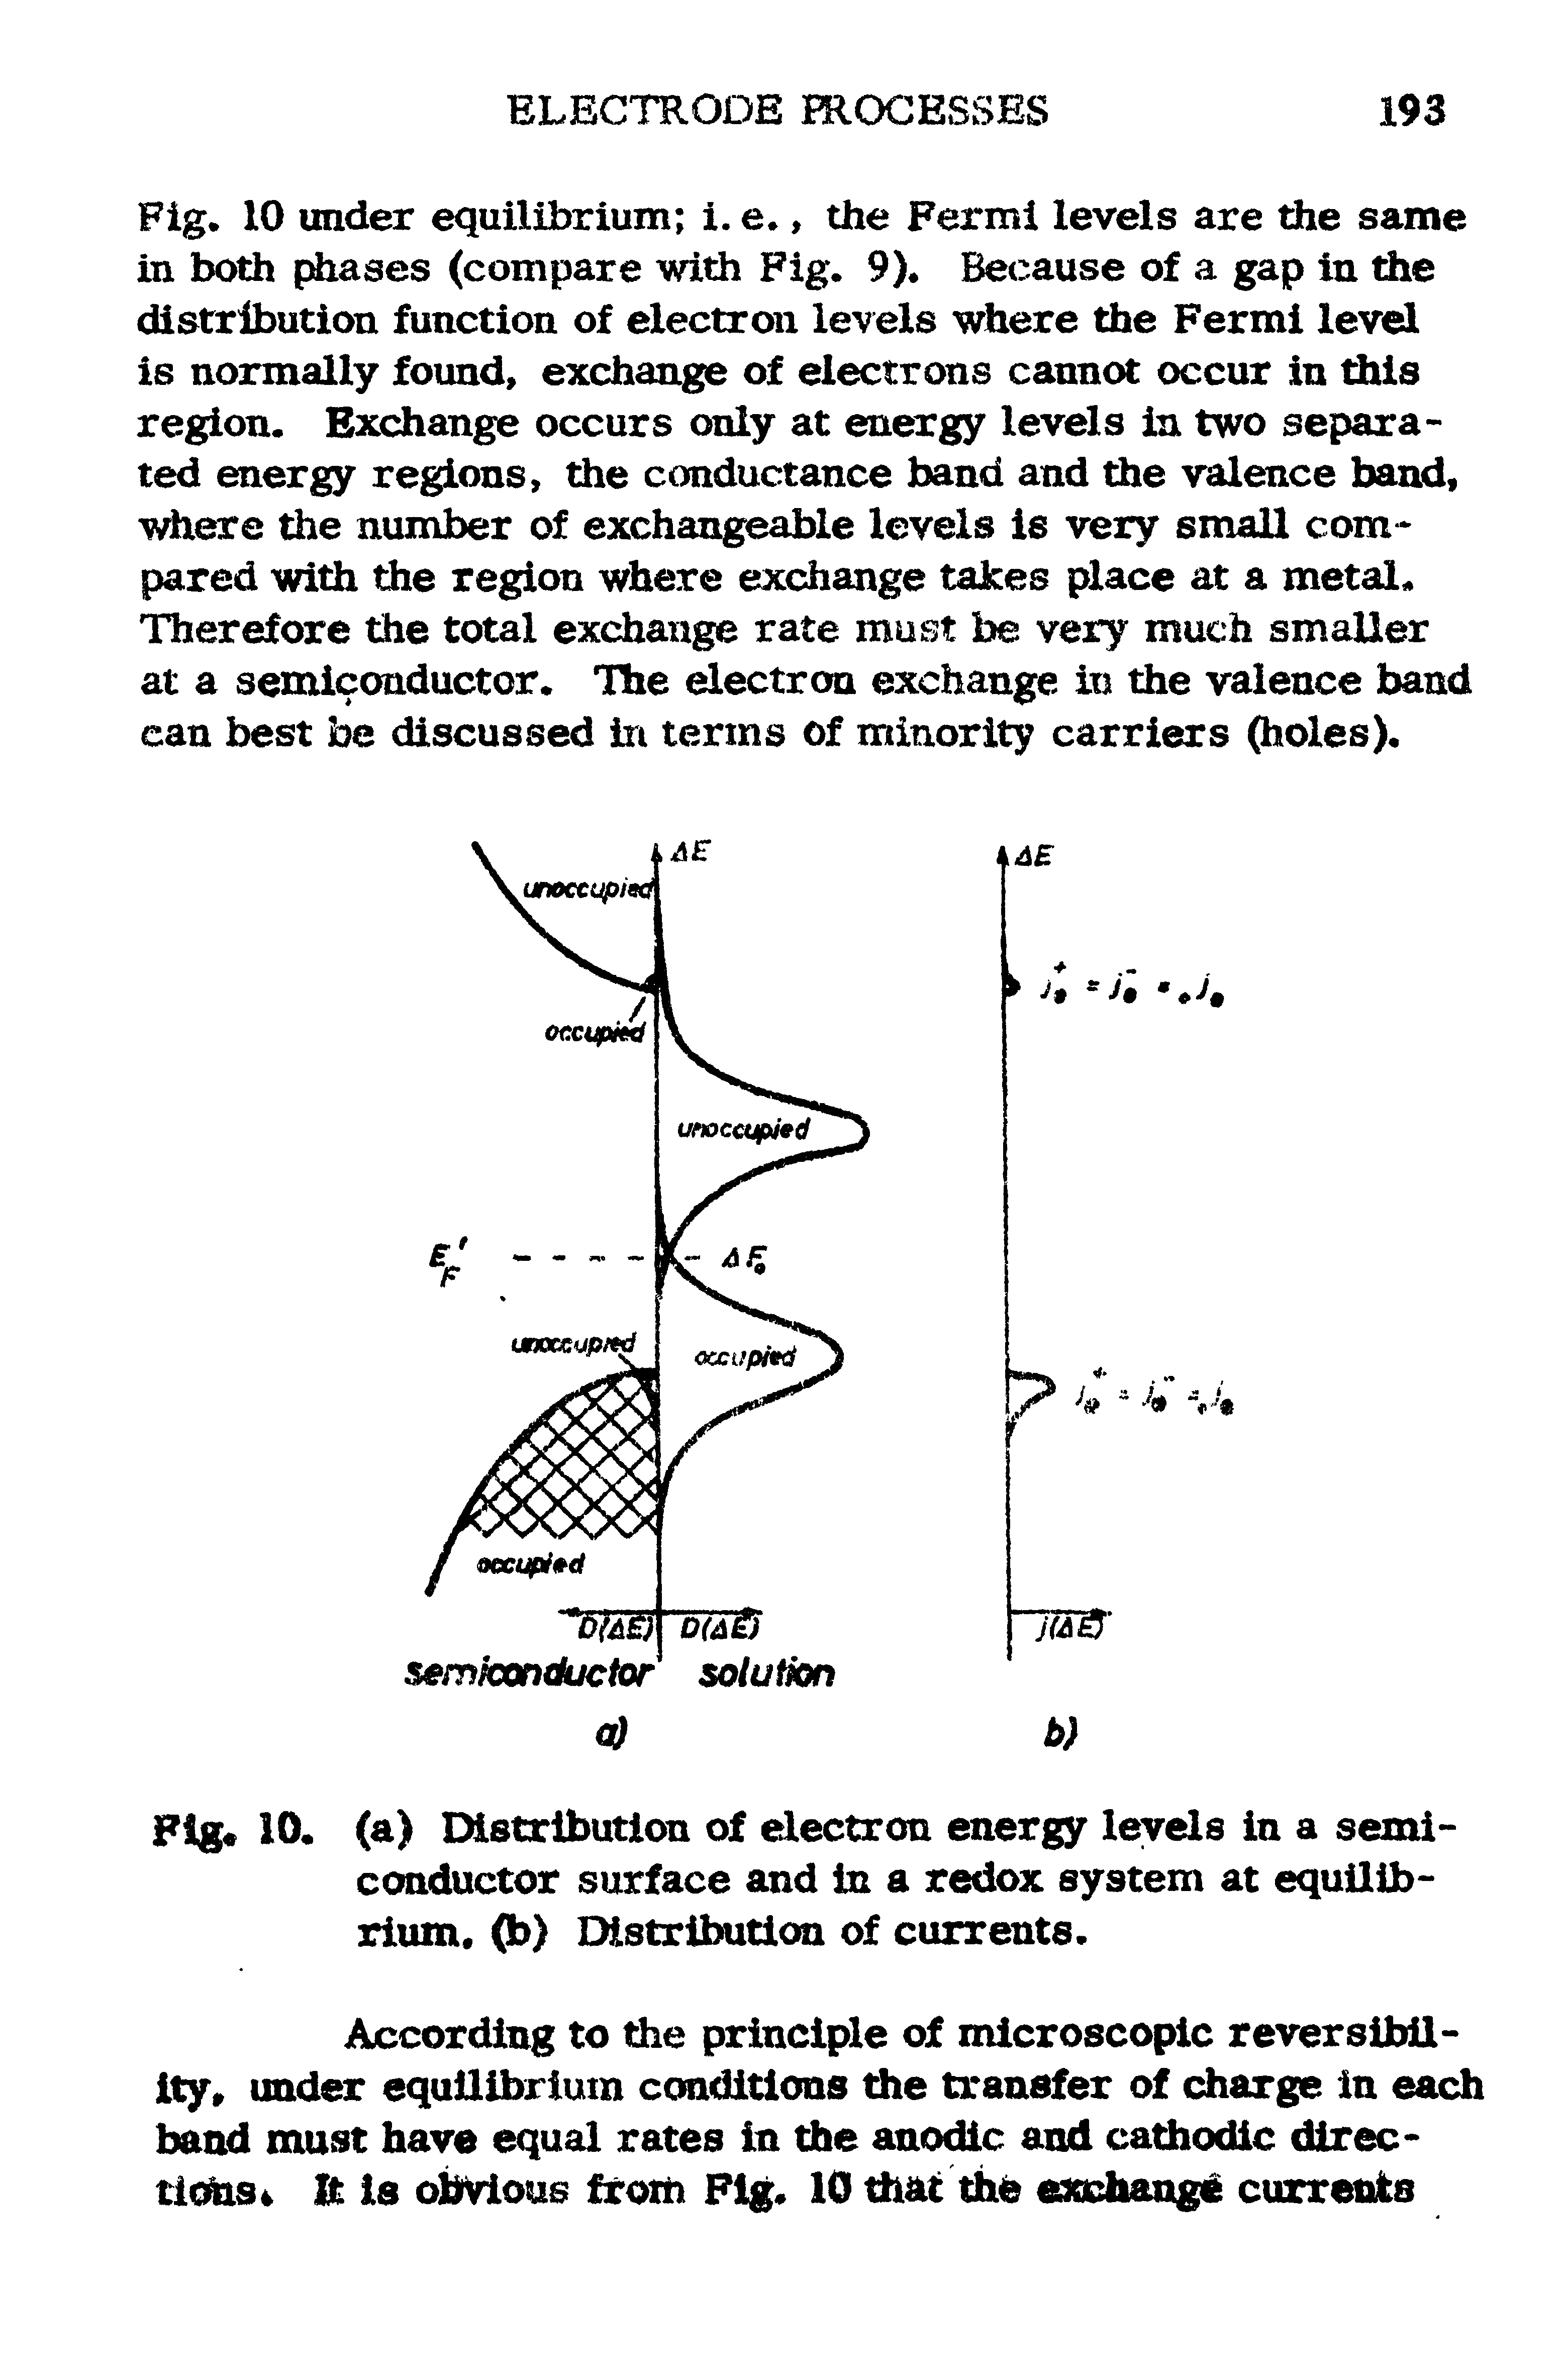 Fig. 10 under equilibrium i. e., the Fermi levels are the same in both phases (compare with Fig. 9). Because of a gap in the distribution function of electron levels where the Fermi level is normally found, exchange of electrons cannot occur in this region. Exchange occurs only at energy levels in two separated energy regions, the conductance band and the valence band, where the number of exchangeable levels is very small compared with the region where exchange takes place at a metal. Therefore the total exchange rate must be very much smaller at a semiconductor. The electron exchange in the valence band can best be discussed in terms of minority carriers (holes).